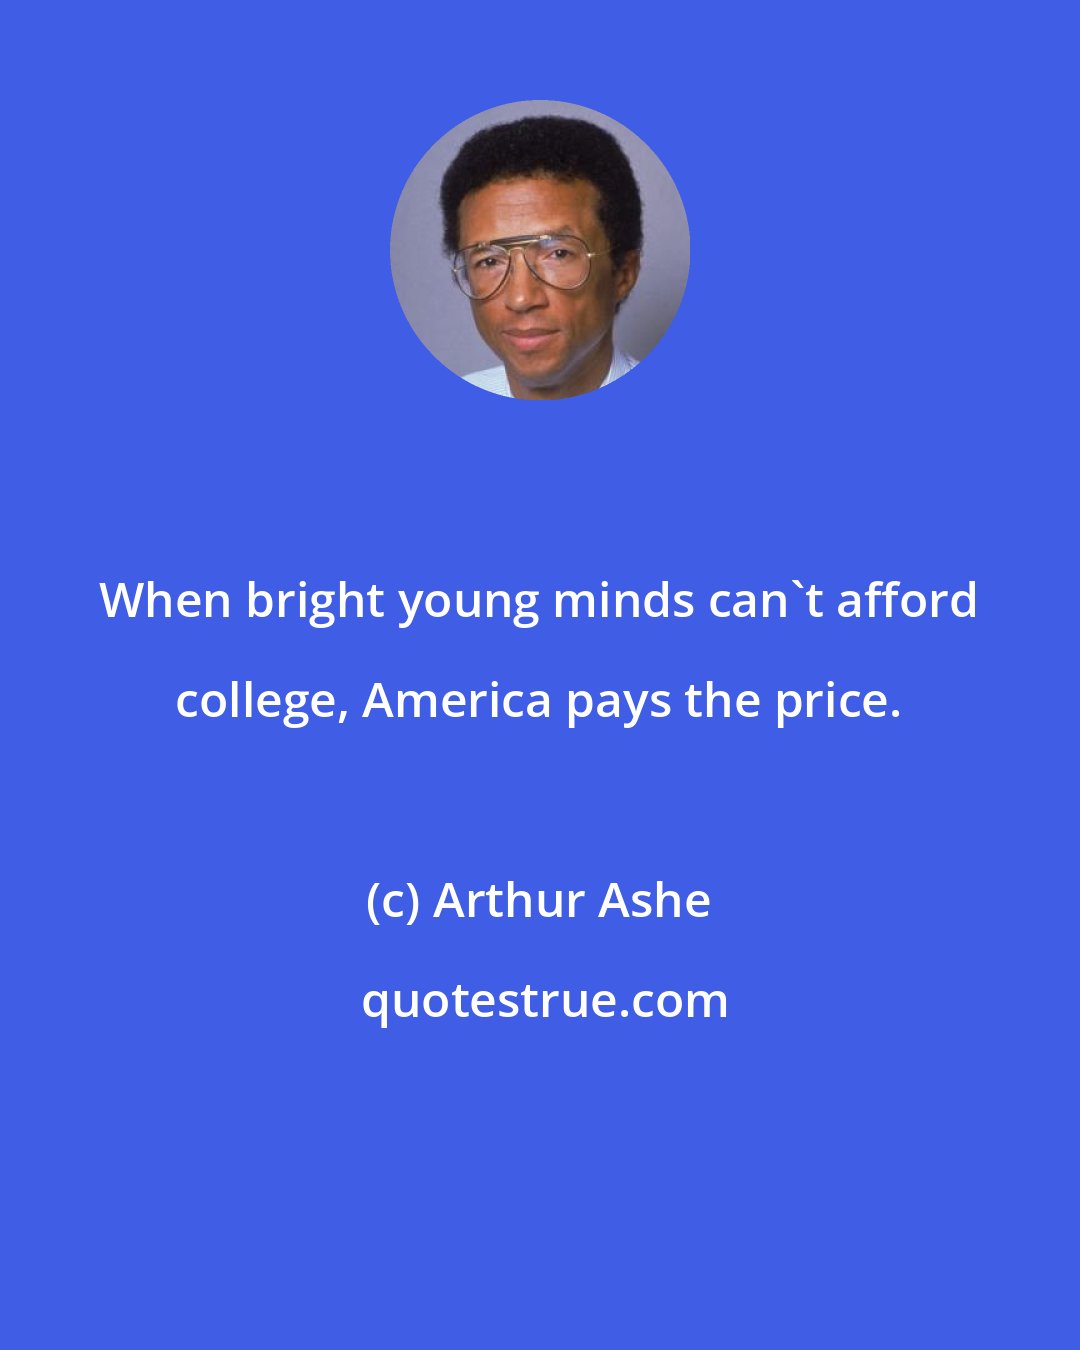 Arthur Ashe: When bright young minds can't afford college, America pays the price.